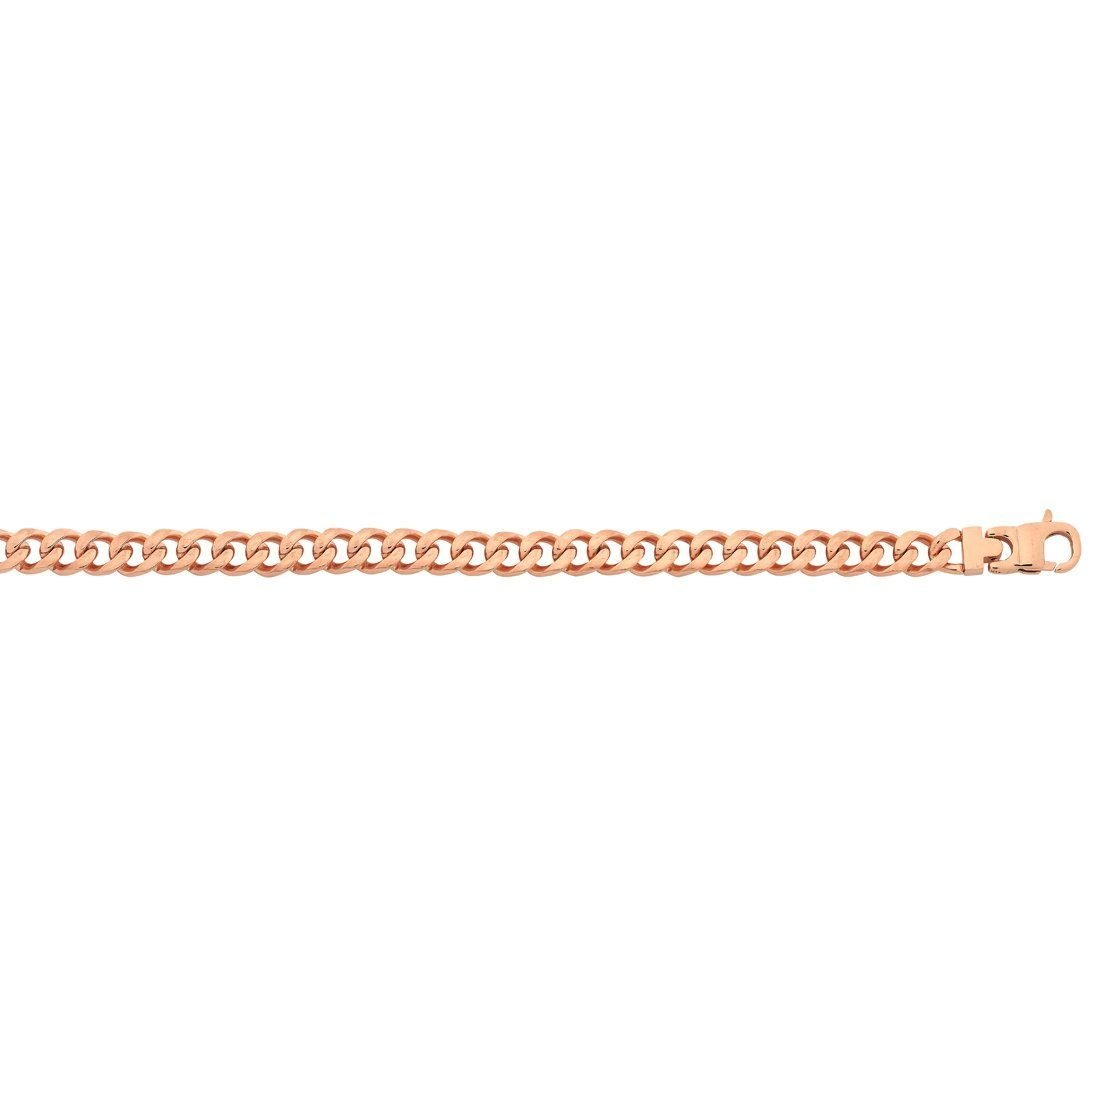 1.3MM Rose Gold Curb Chain .925 Solid Sterling Silver Length 16"-22" Inches